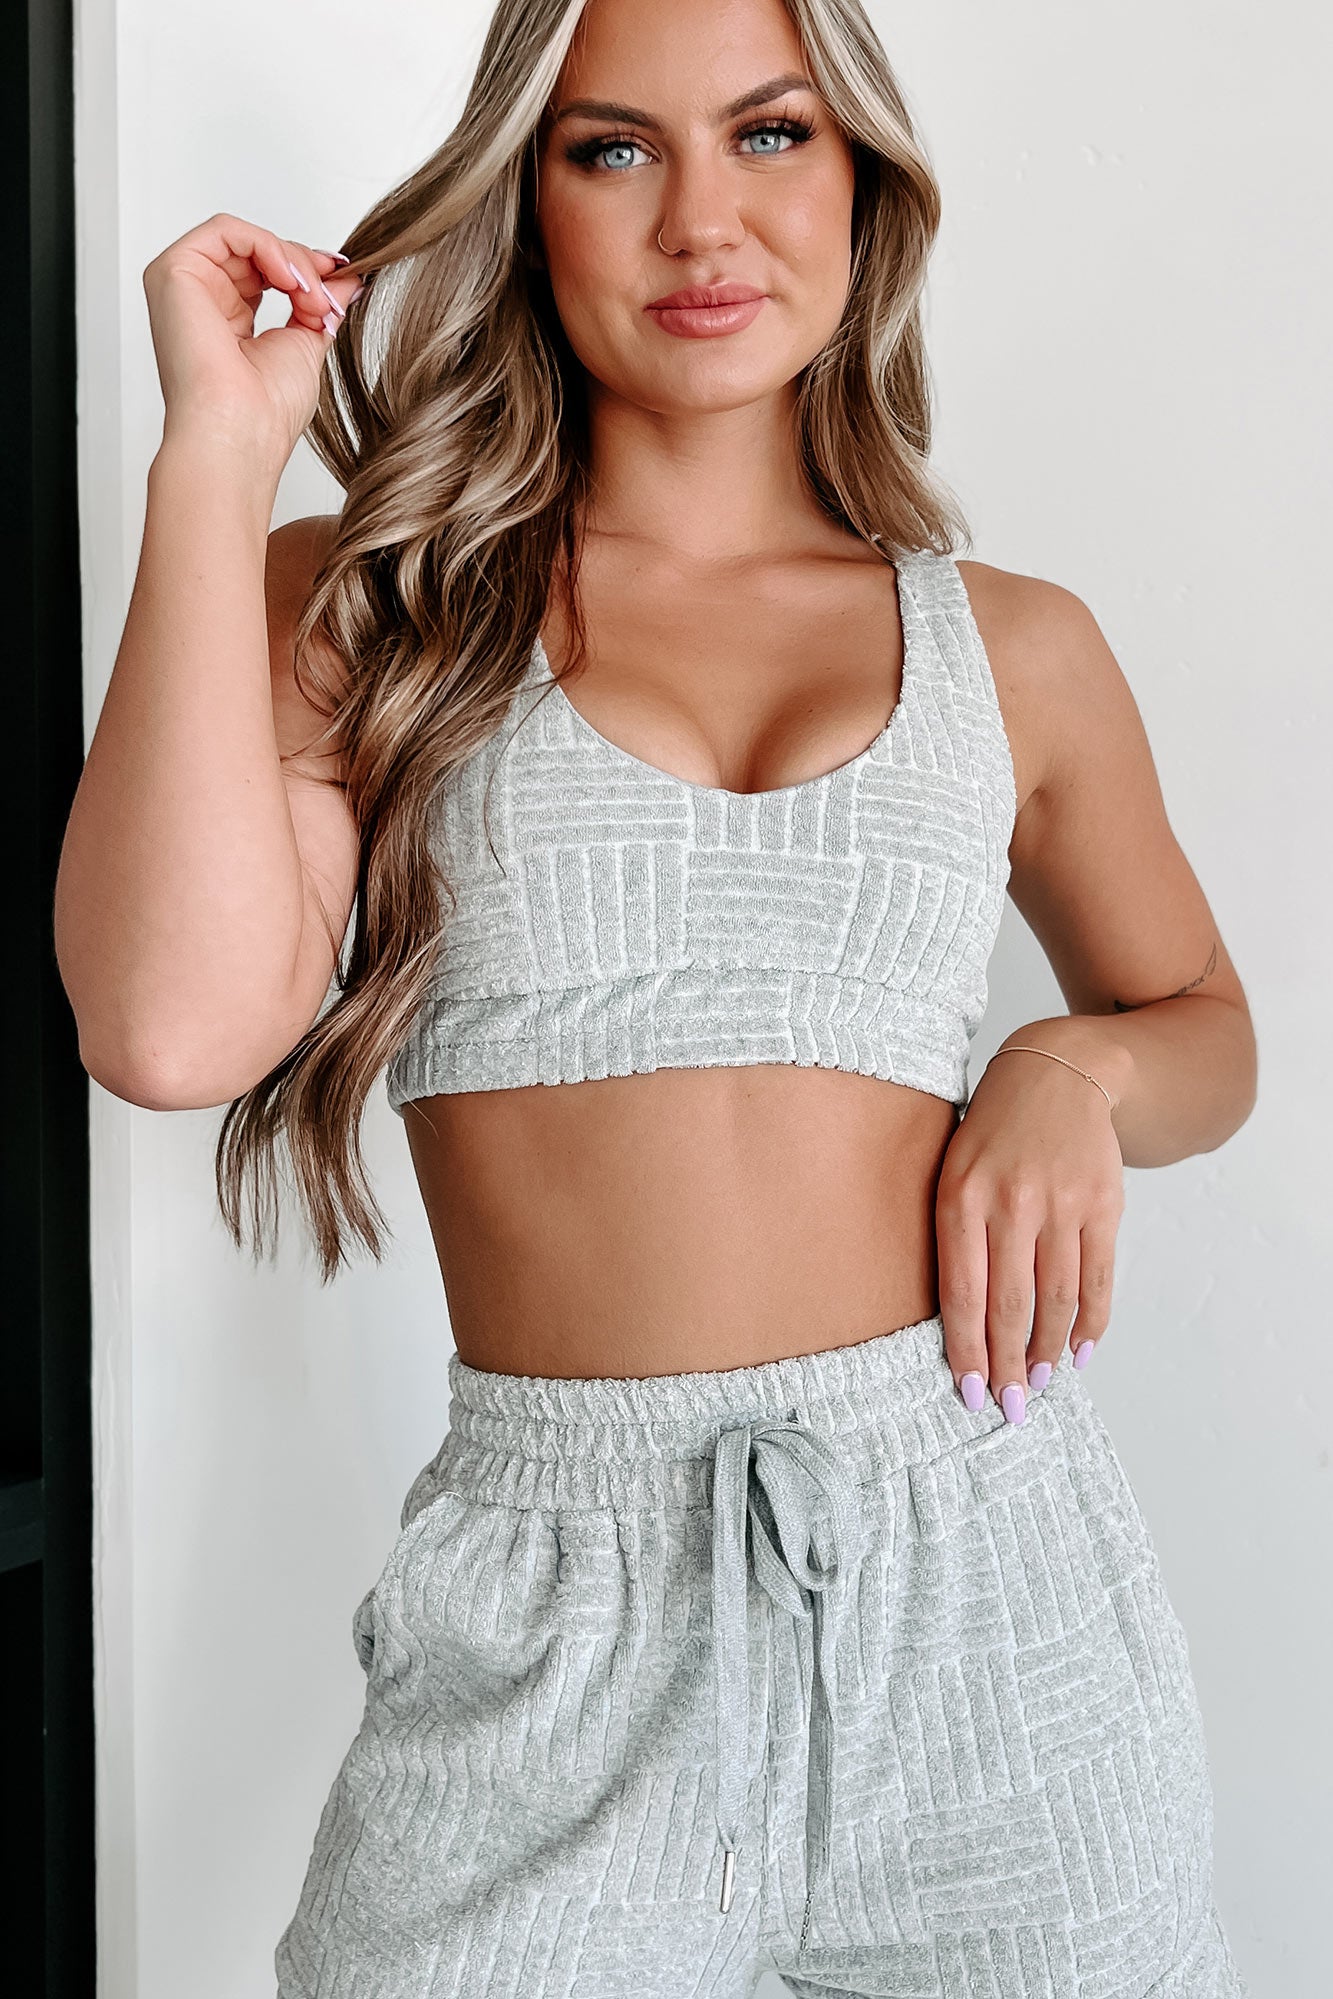 Can't Be Like Me Textured Crop Top (Heather Grey) - NanaMacs